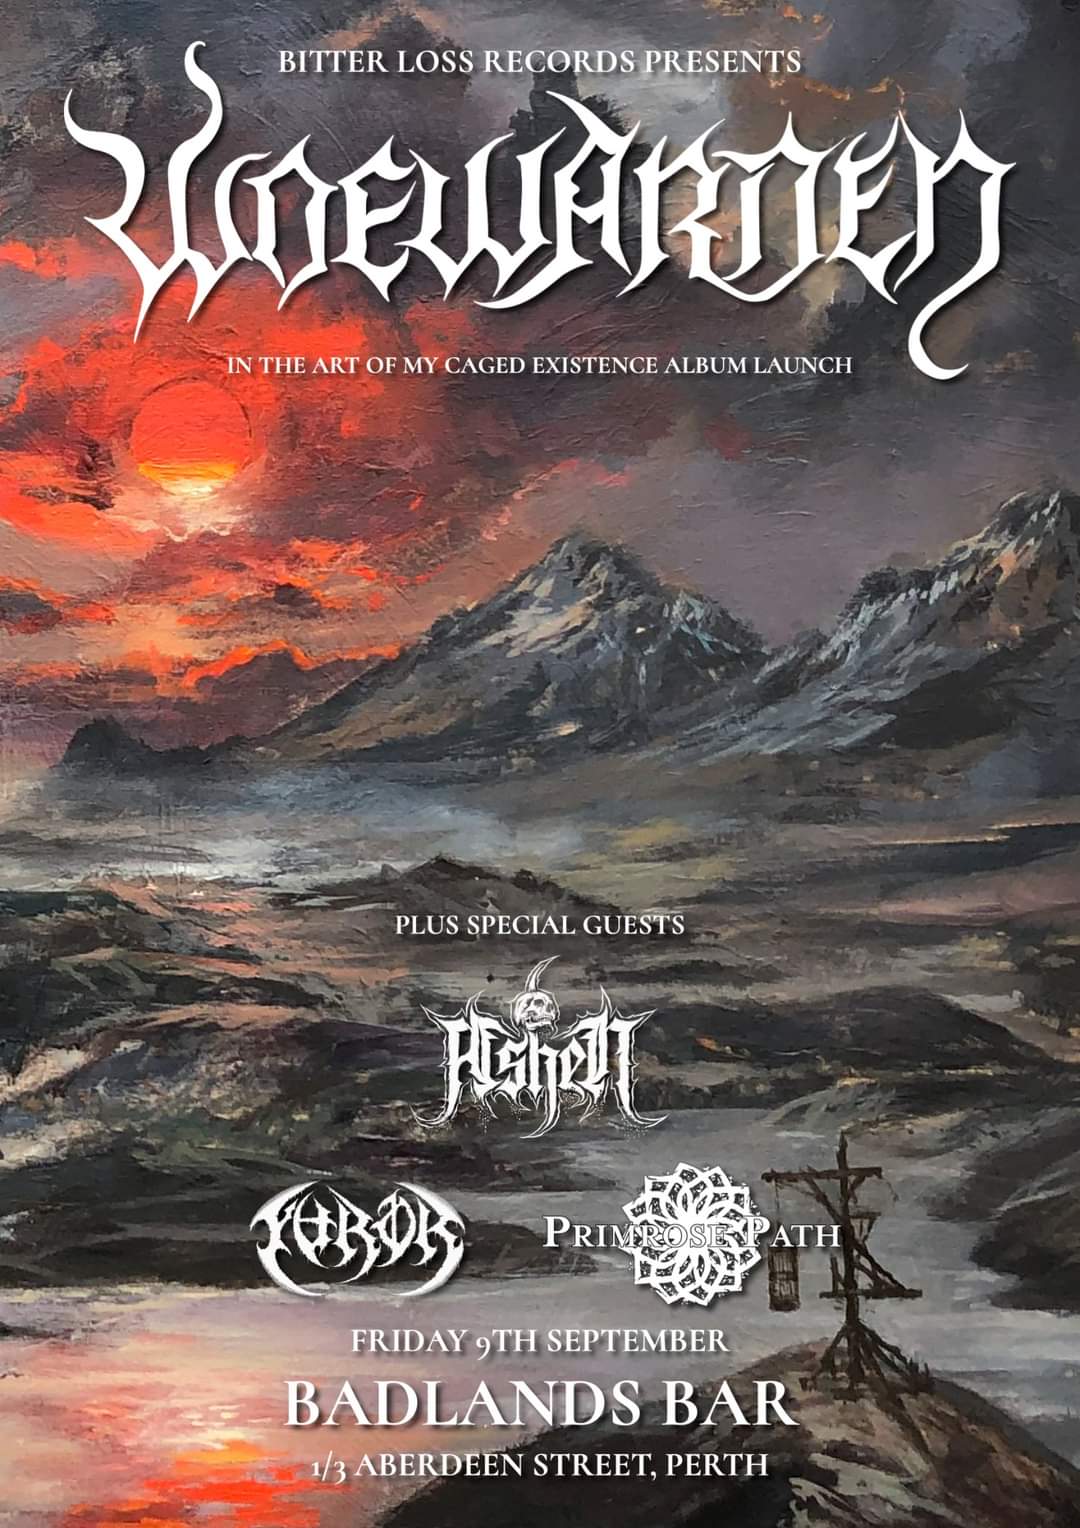 Woewarden - 'In the Art of My Caged Existence' Album Launch - with Ashen, The Furor + Primrose Path